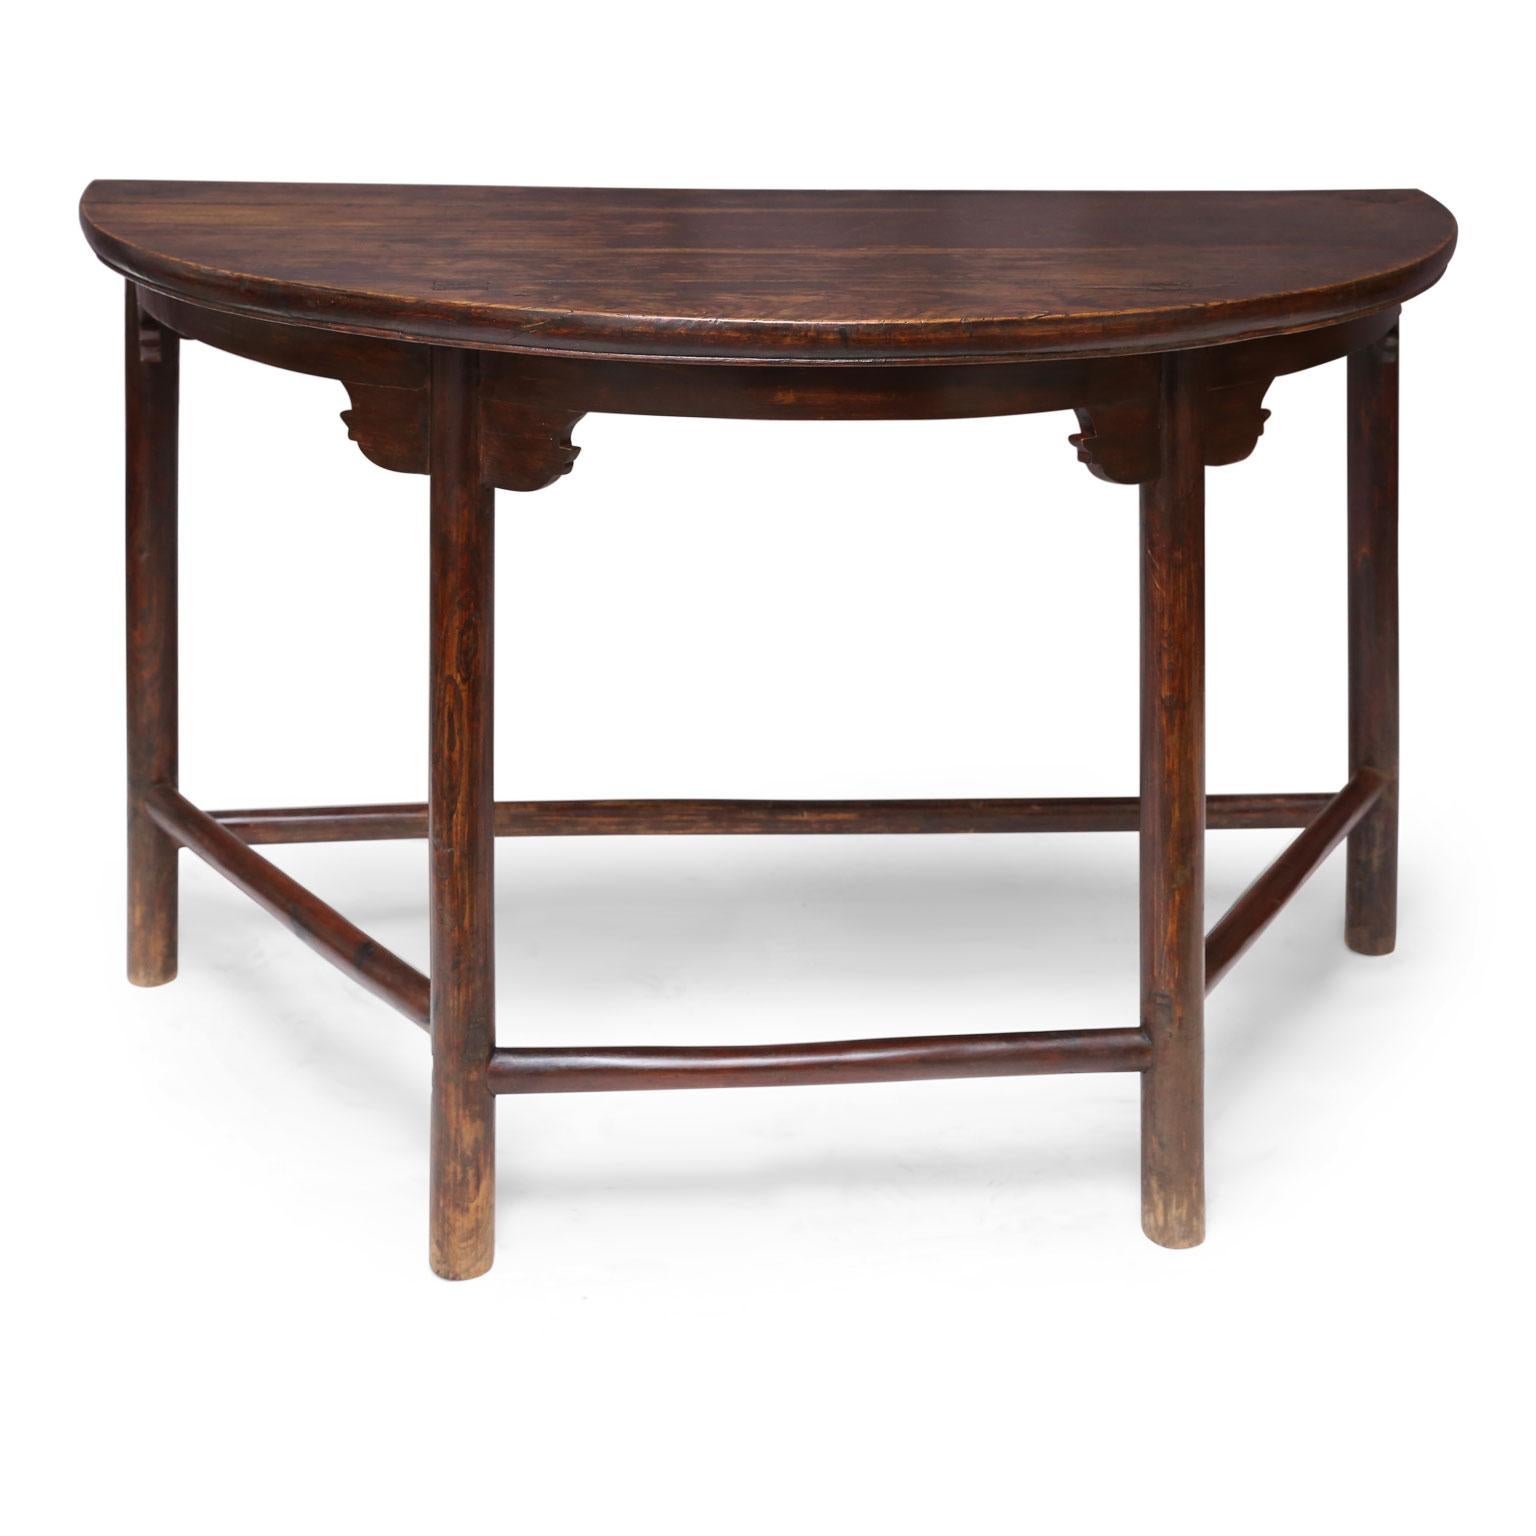 Large Chinese elm demilune console, circa 1910-1930. Remnants of original brown paint and lacquer finish.